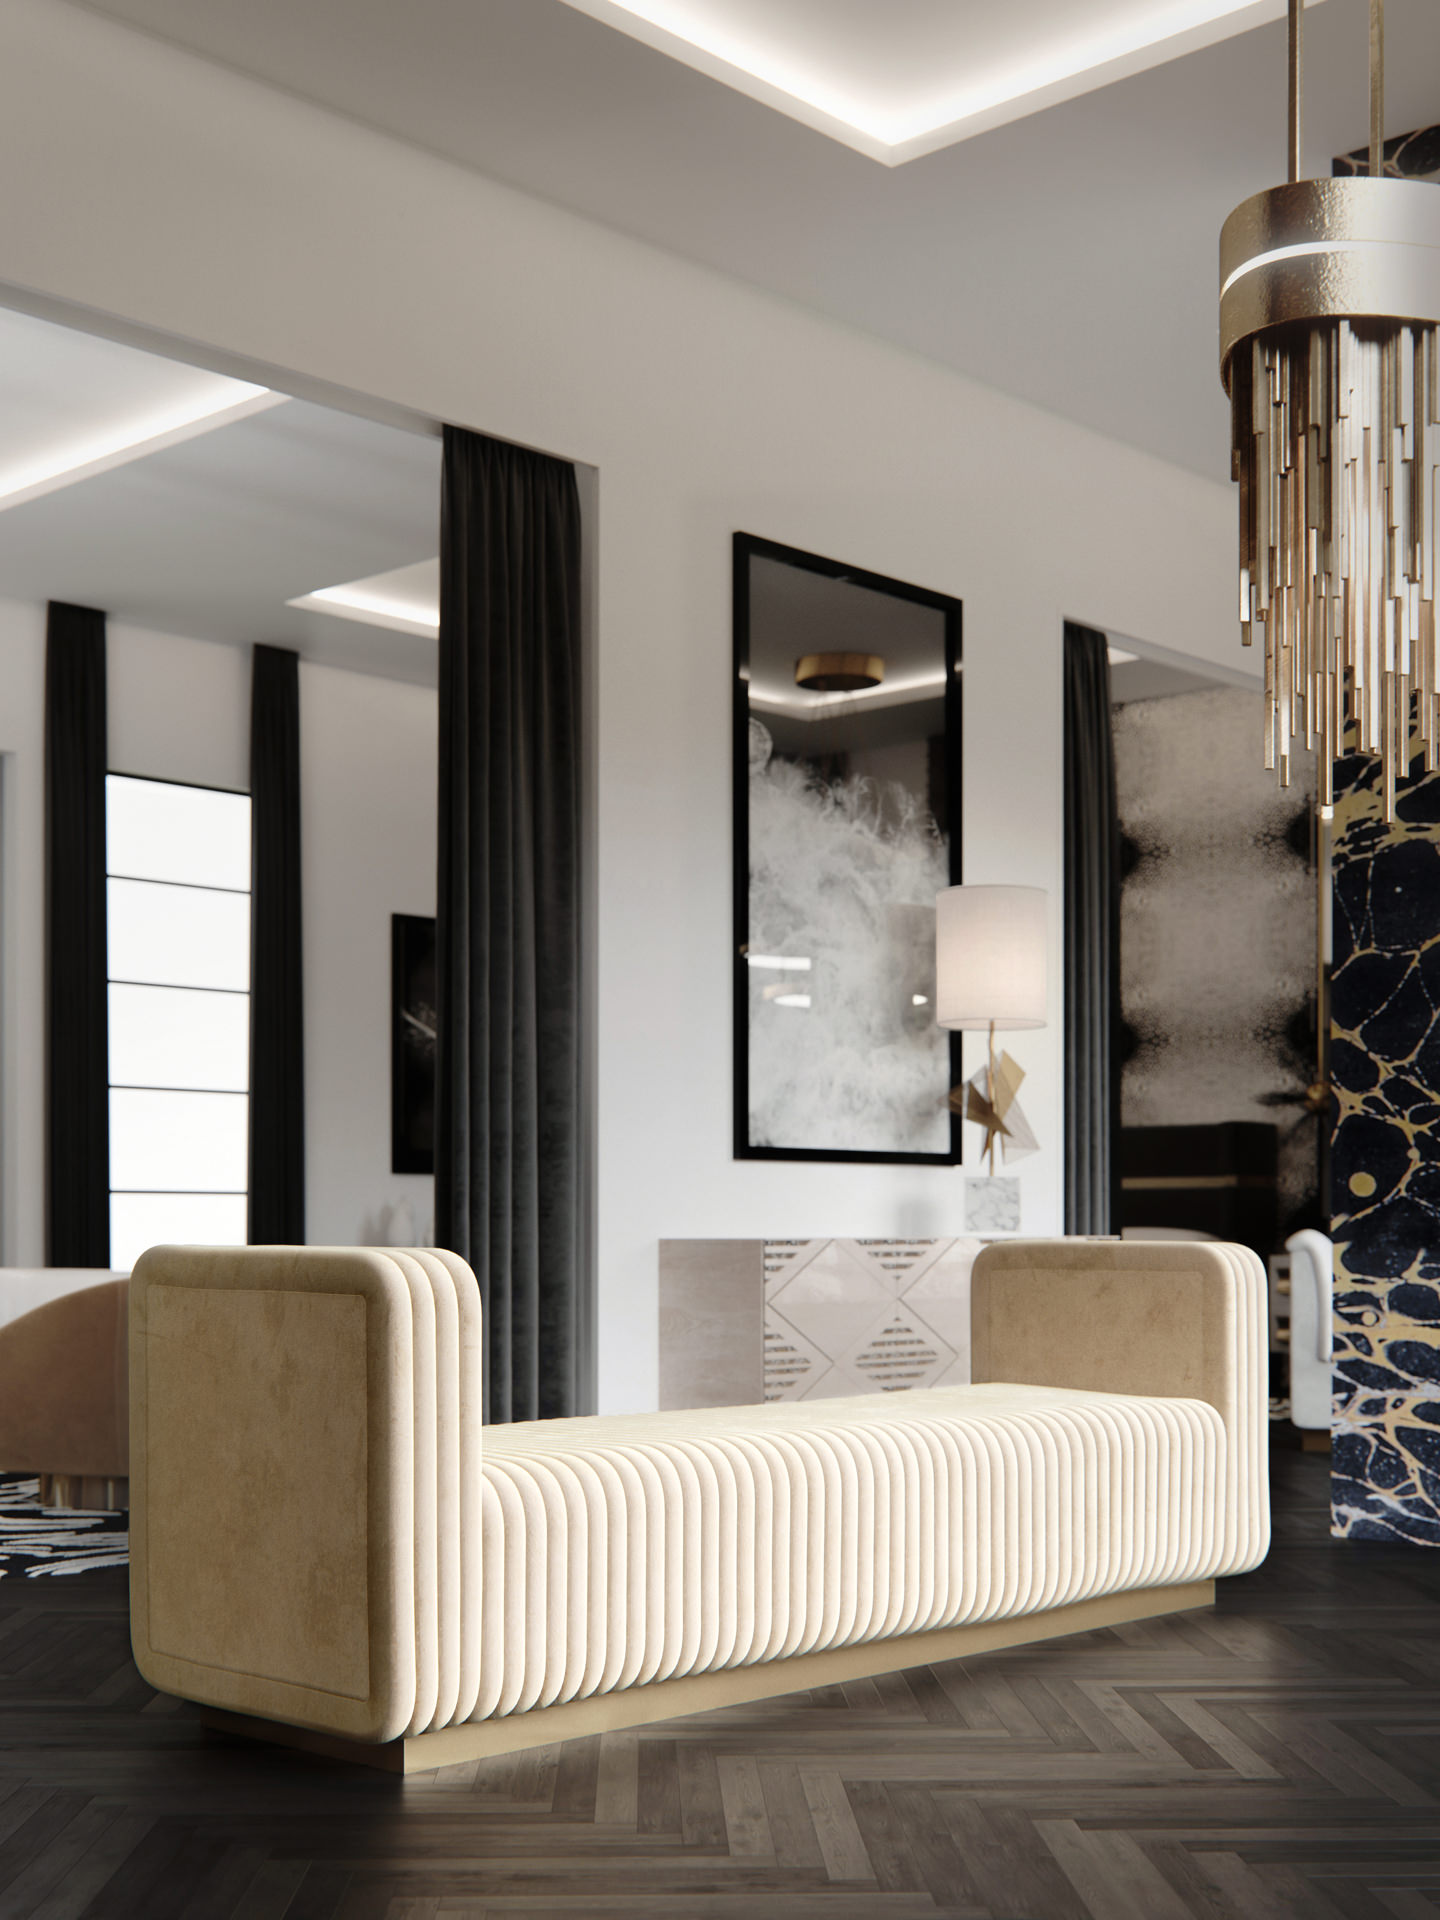 Furniture visualization of a designer ribbed cream suede sofa on the foreground in the black and white interior